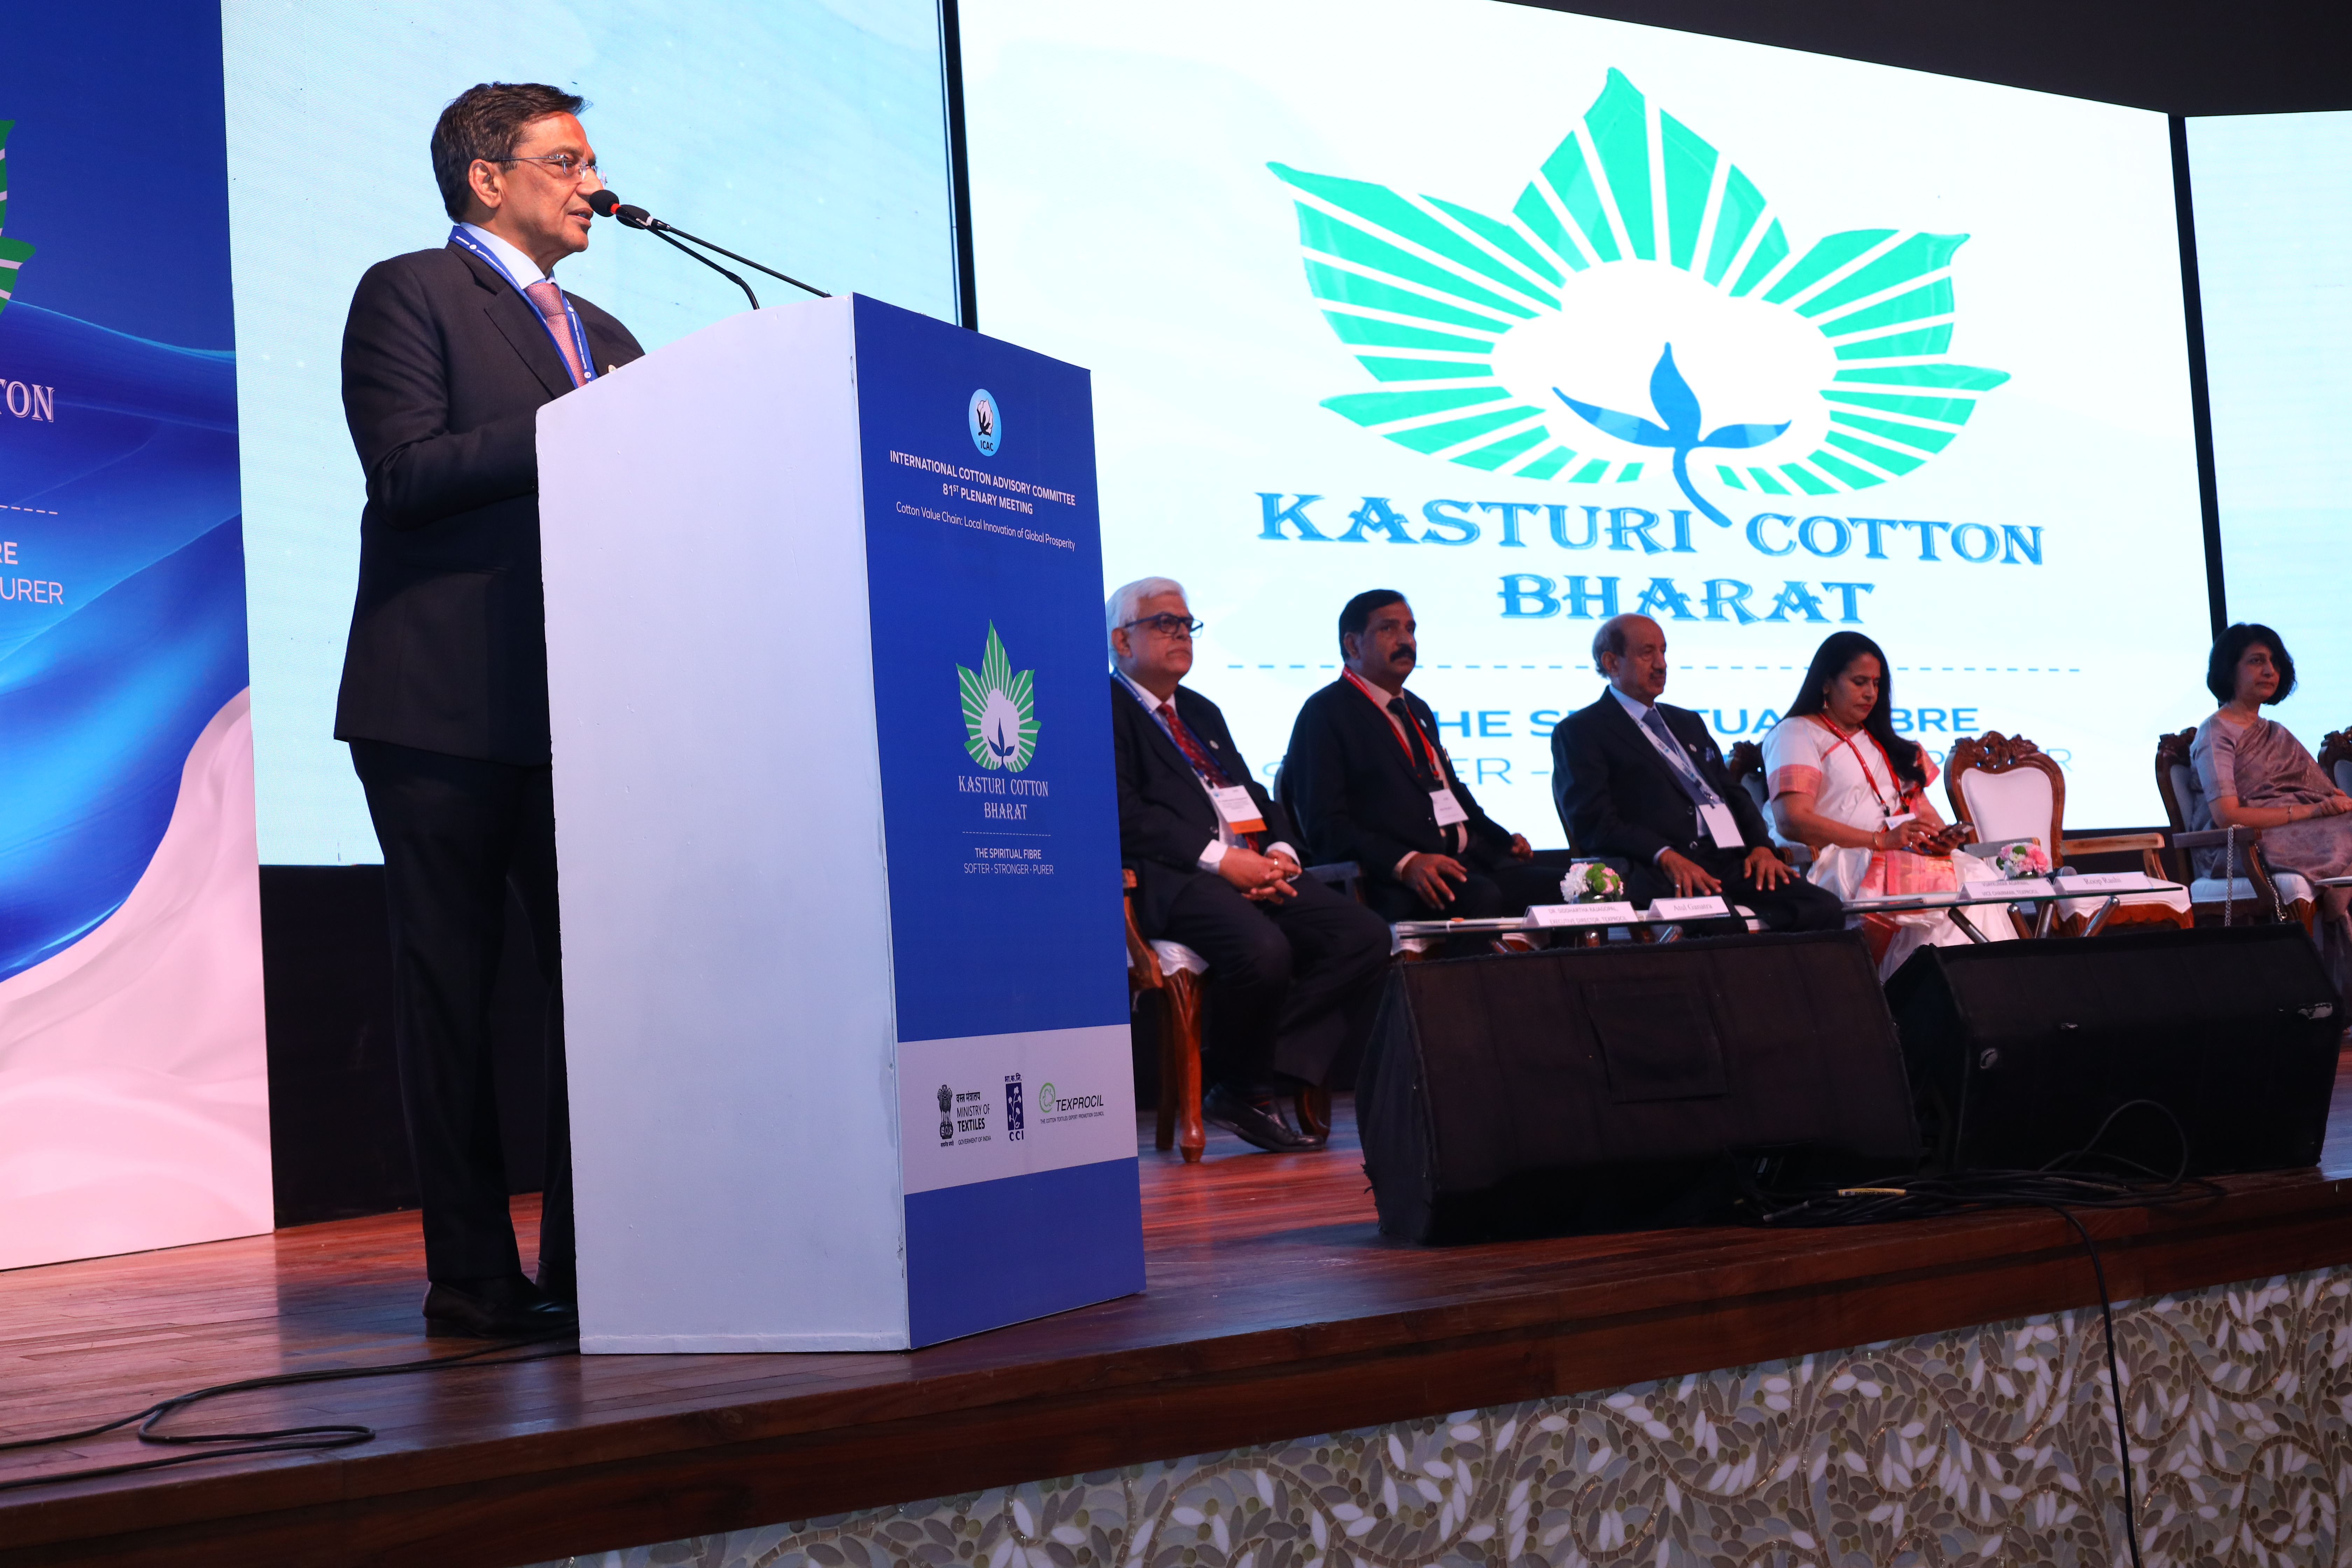 Shri Sunil Patwari, Chairman, TEXPROCIL gave the welcome address at the evening session of Kasturi Cotton Bharat at the 81st Plenary Meeting of the (ICAC) held on 2nd Dec 2023 at the Jio Convention Centre, Mumbai